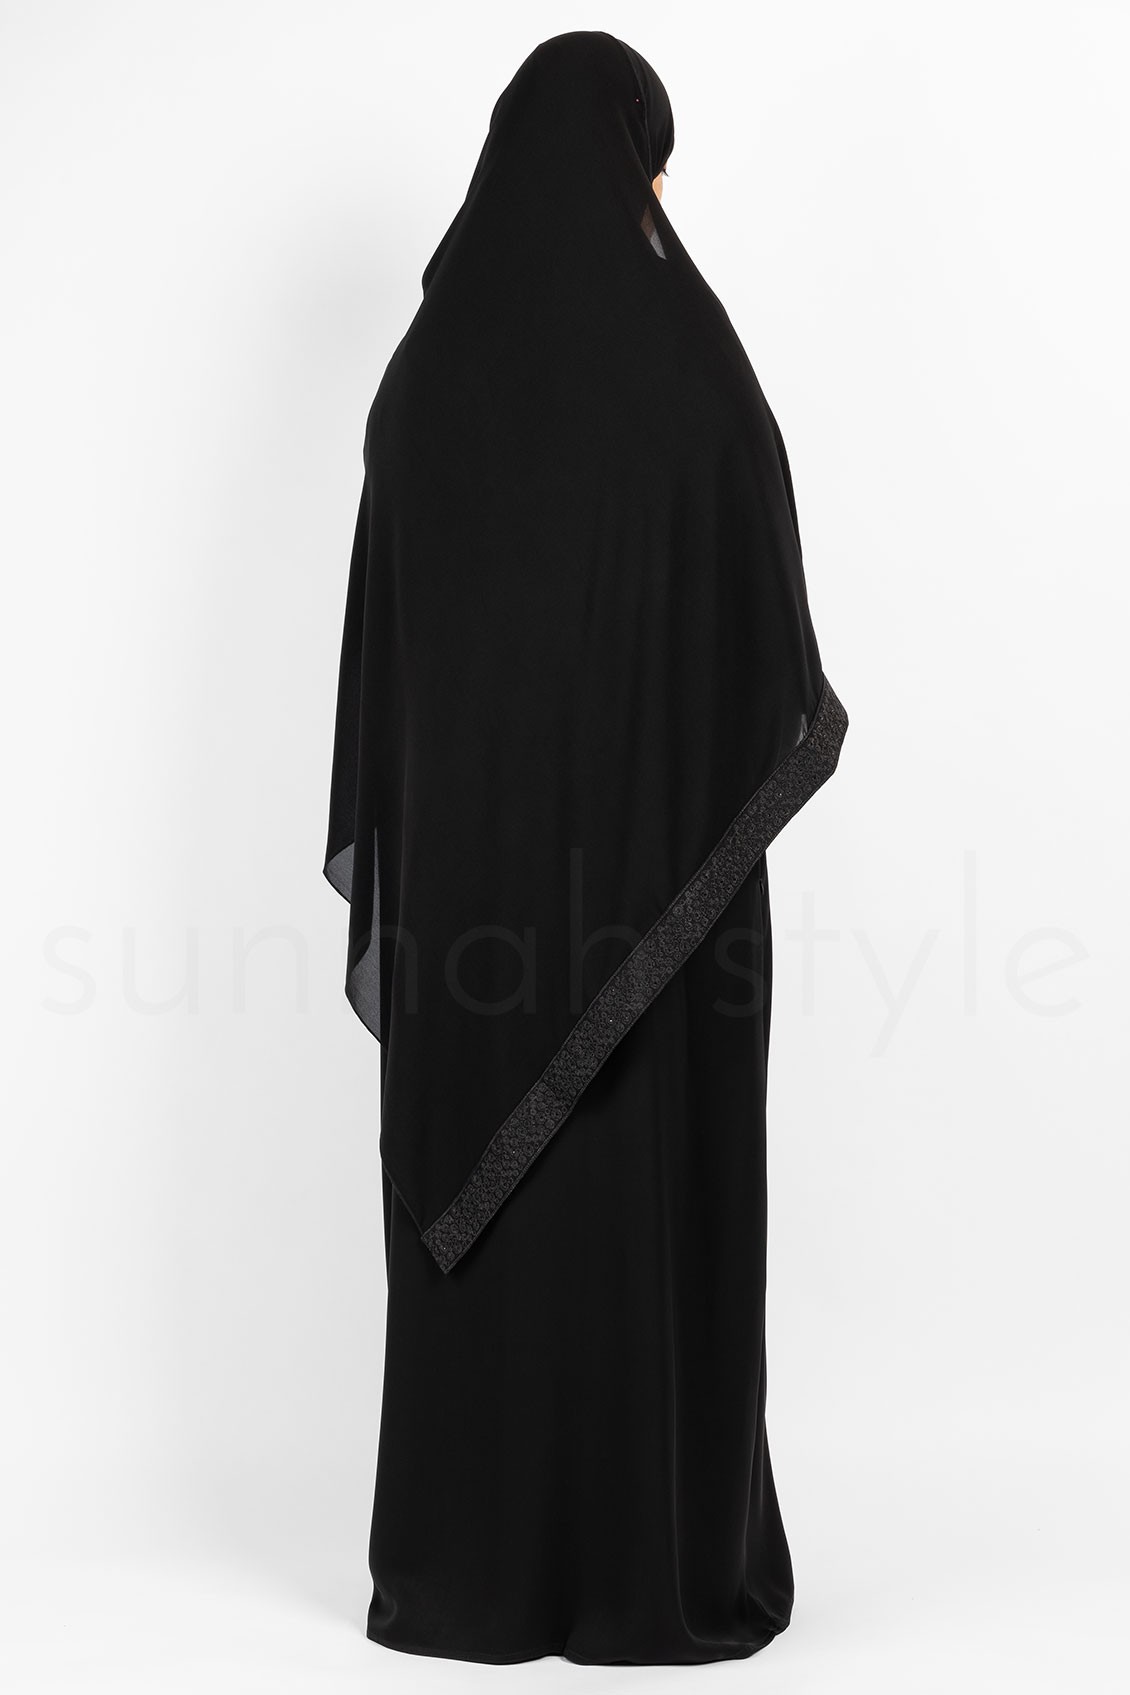 Sunnah Style Glimmer Shayla Embroidered Hijab Black